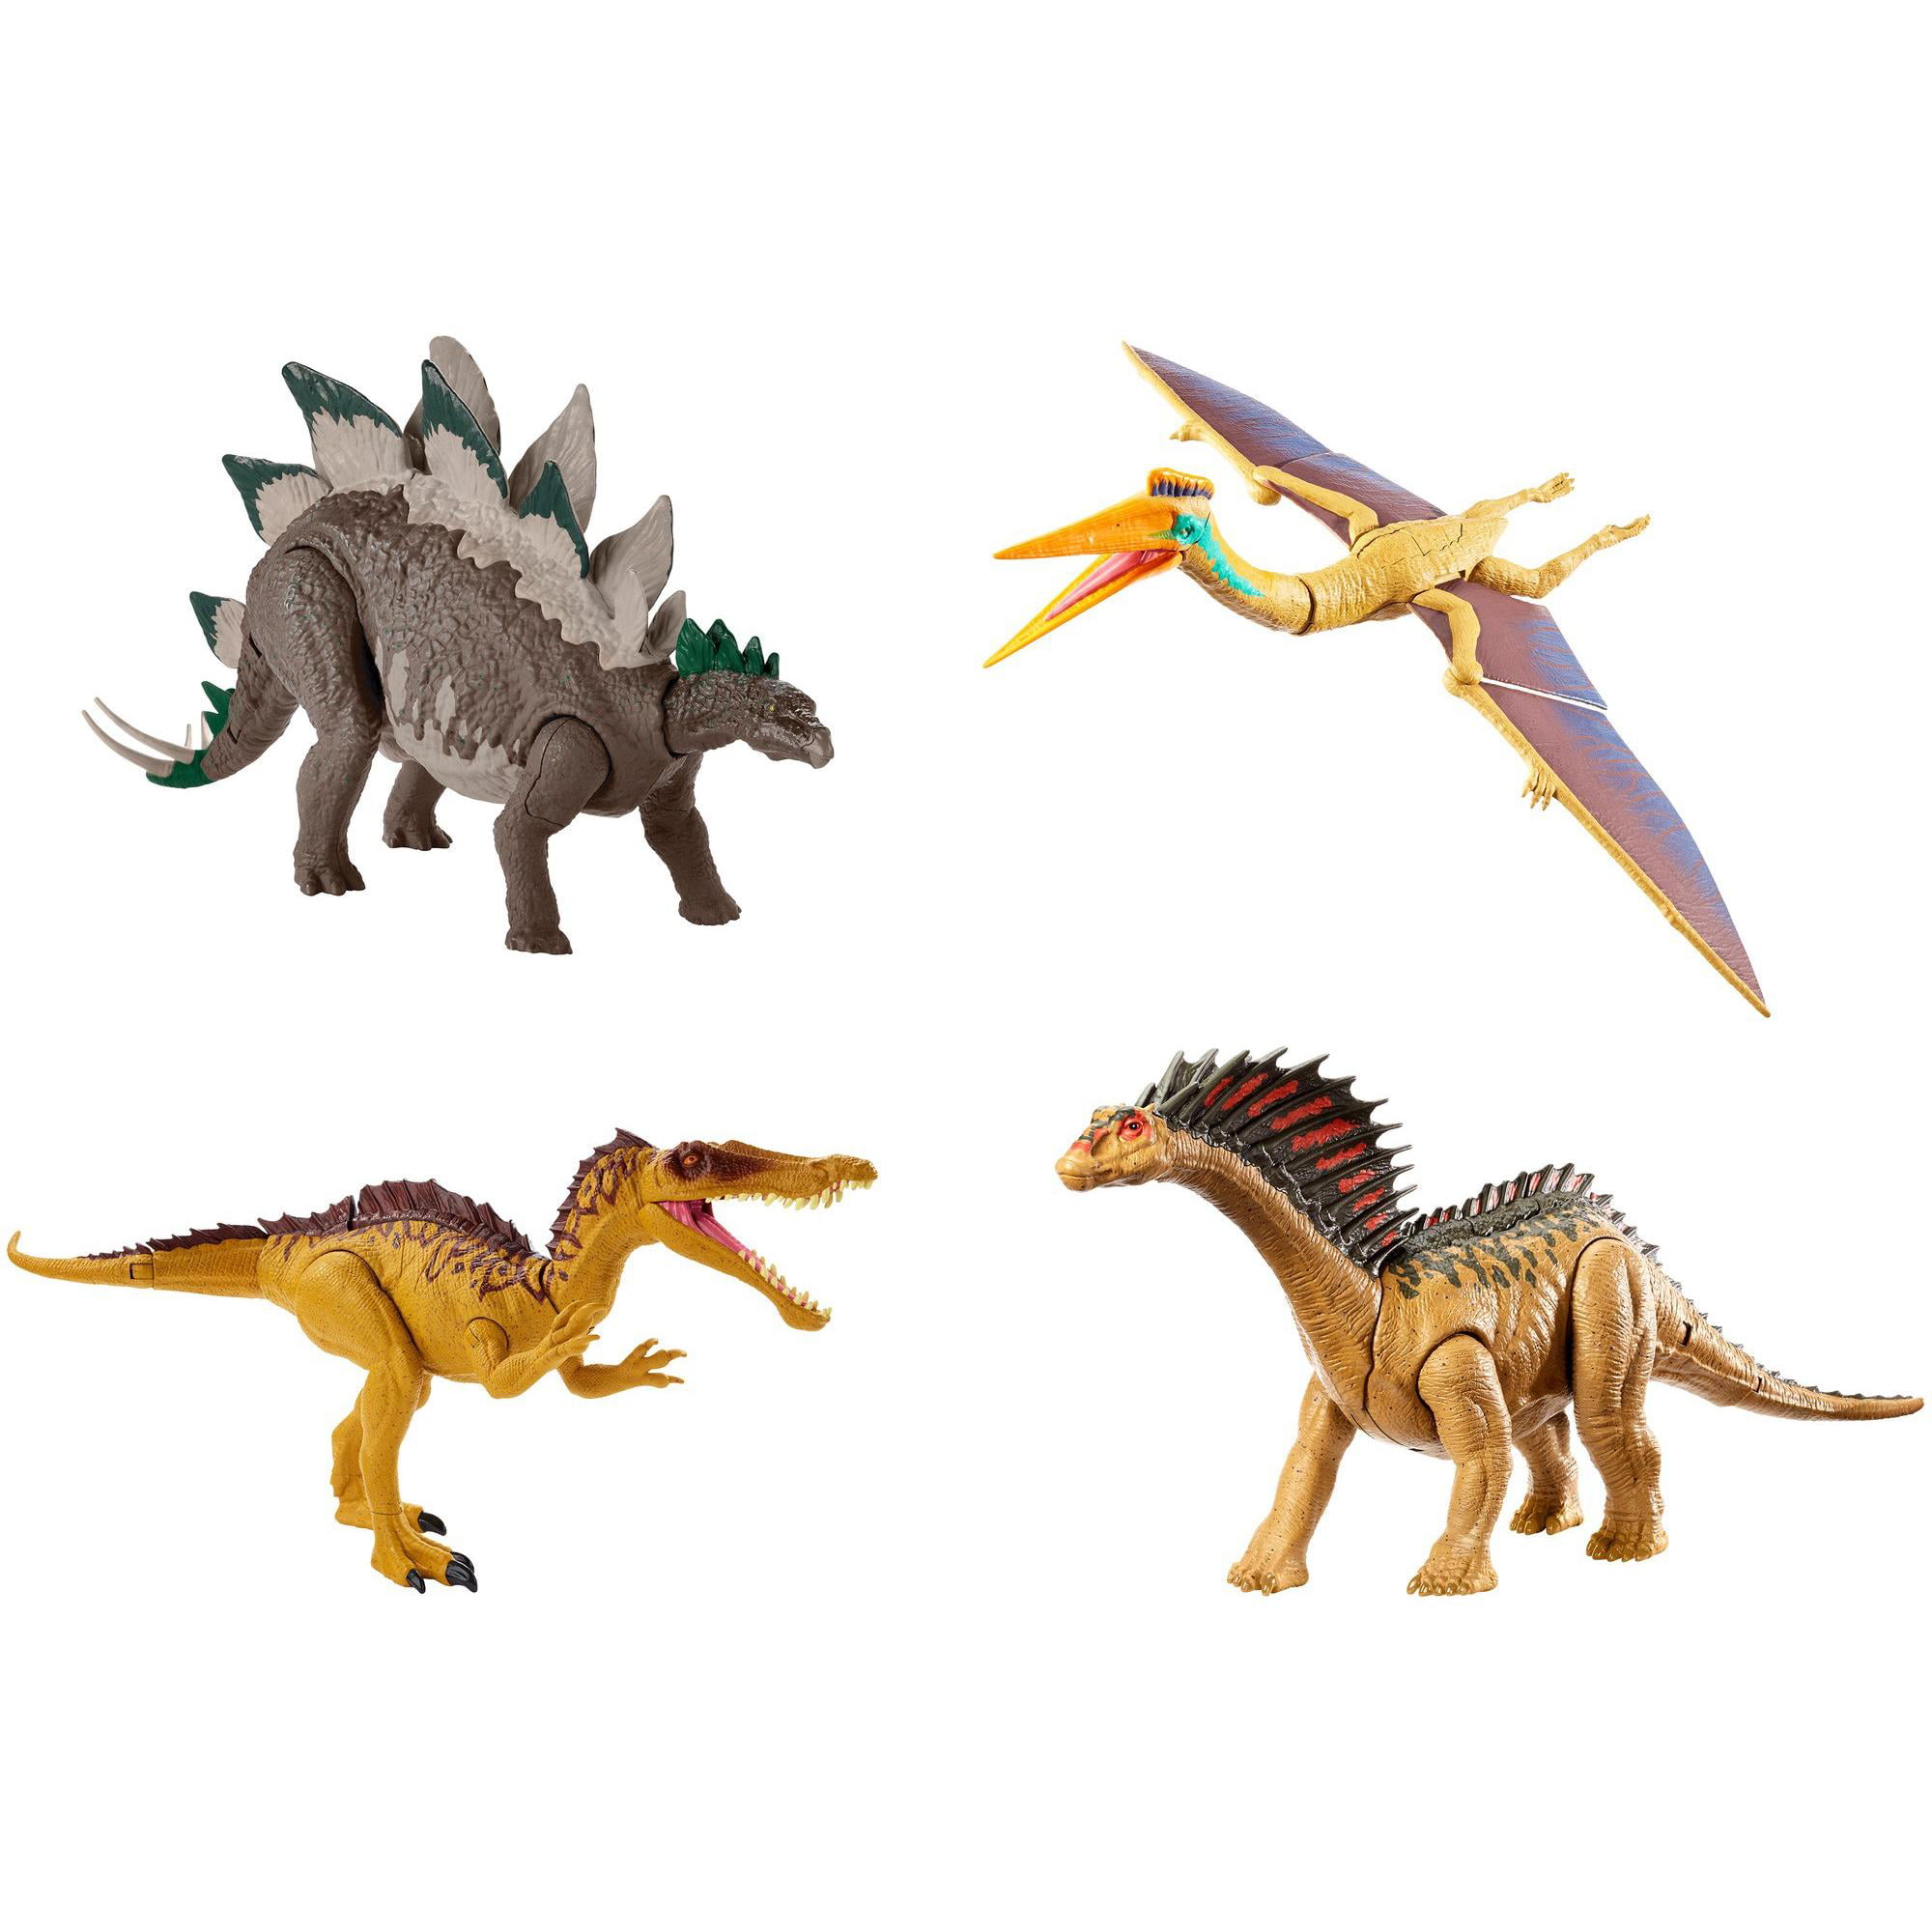 Details about   Imaginext Jurassic World DRACOREX Playset New in Package 